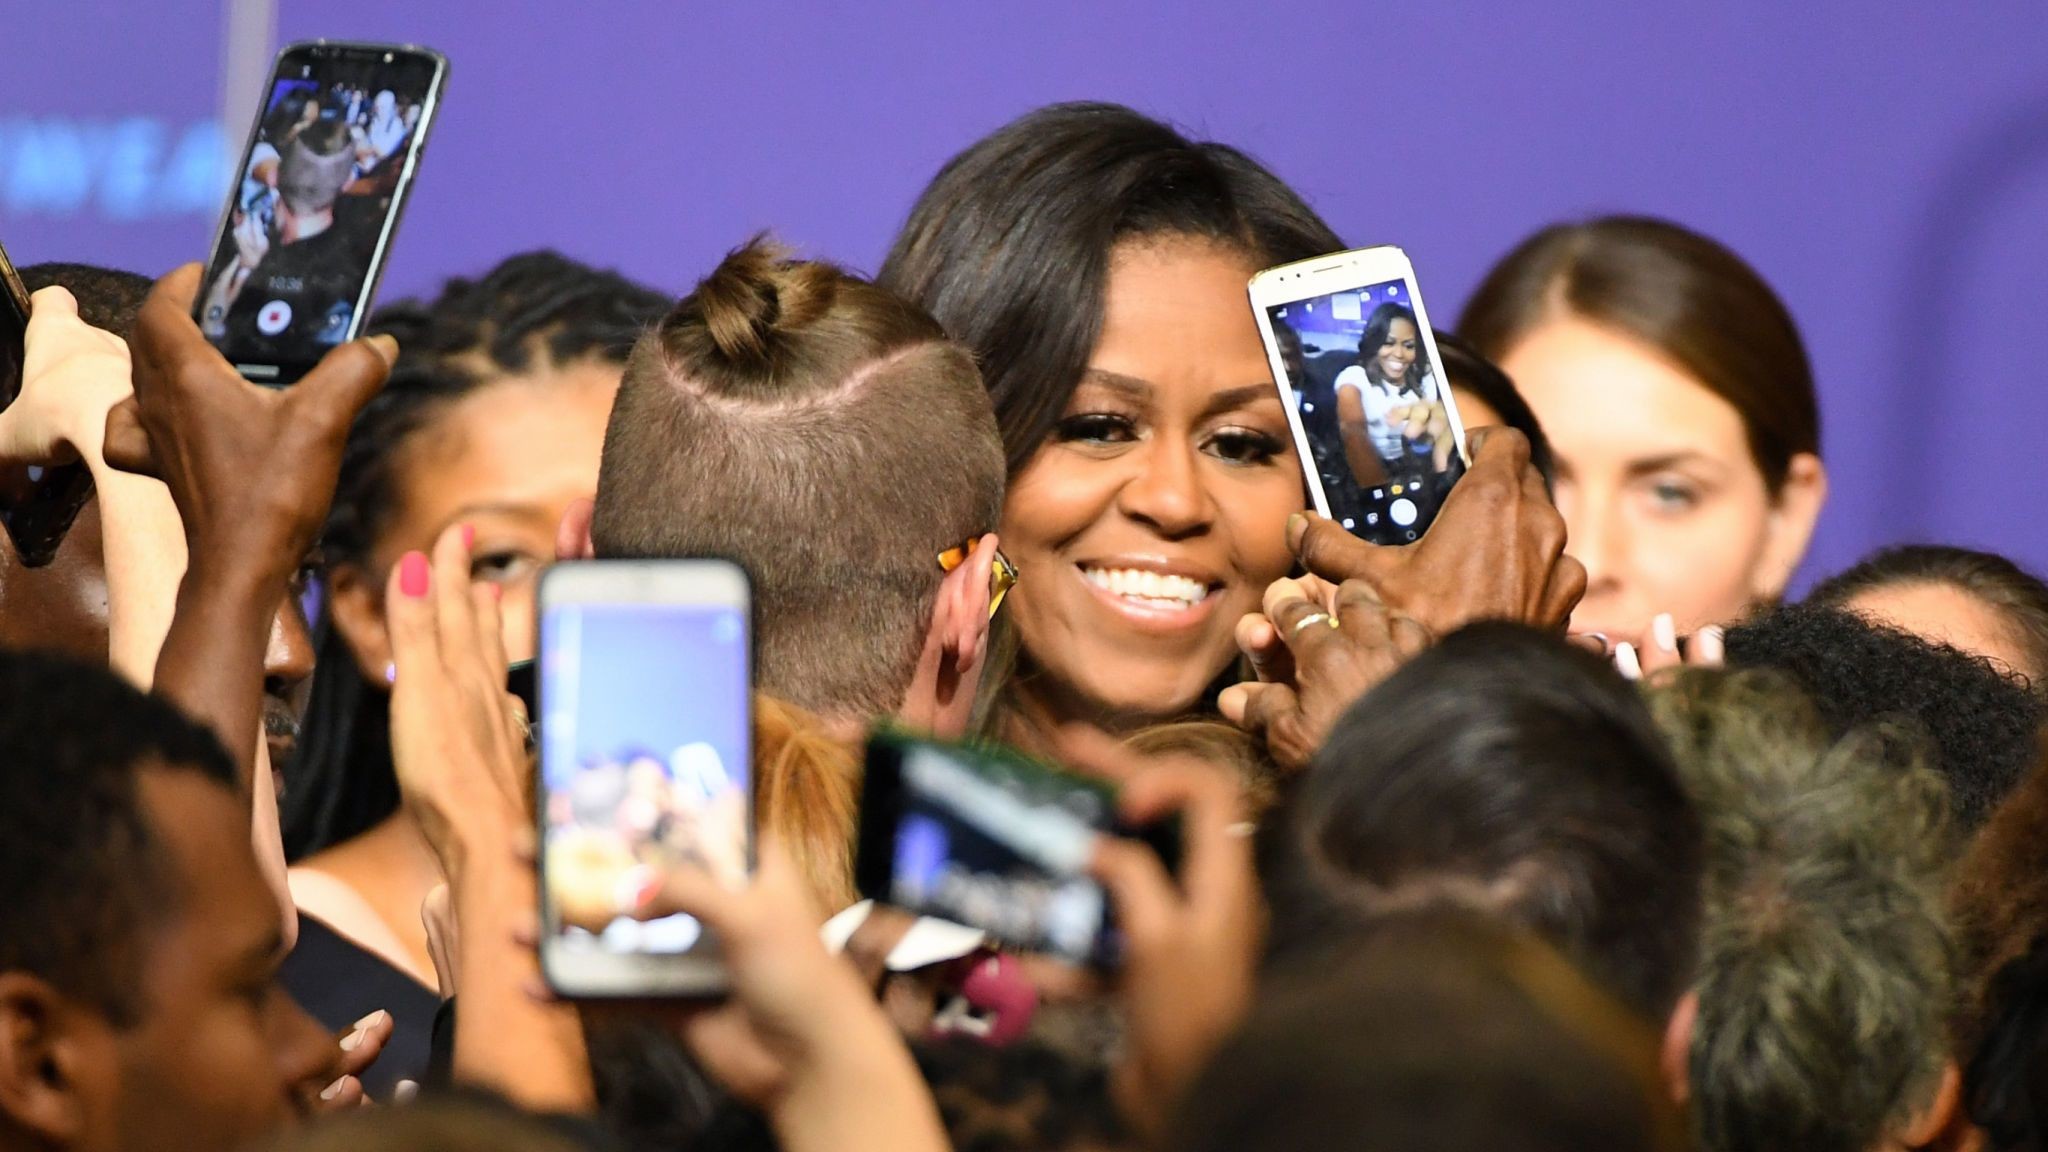 2048x1152 Michelle Obama tops Hillary Clinton as 'most admired' woman - poll